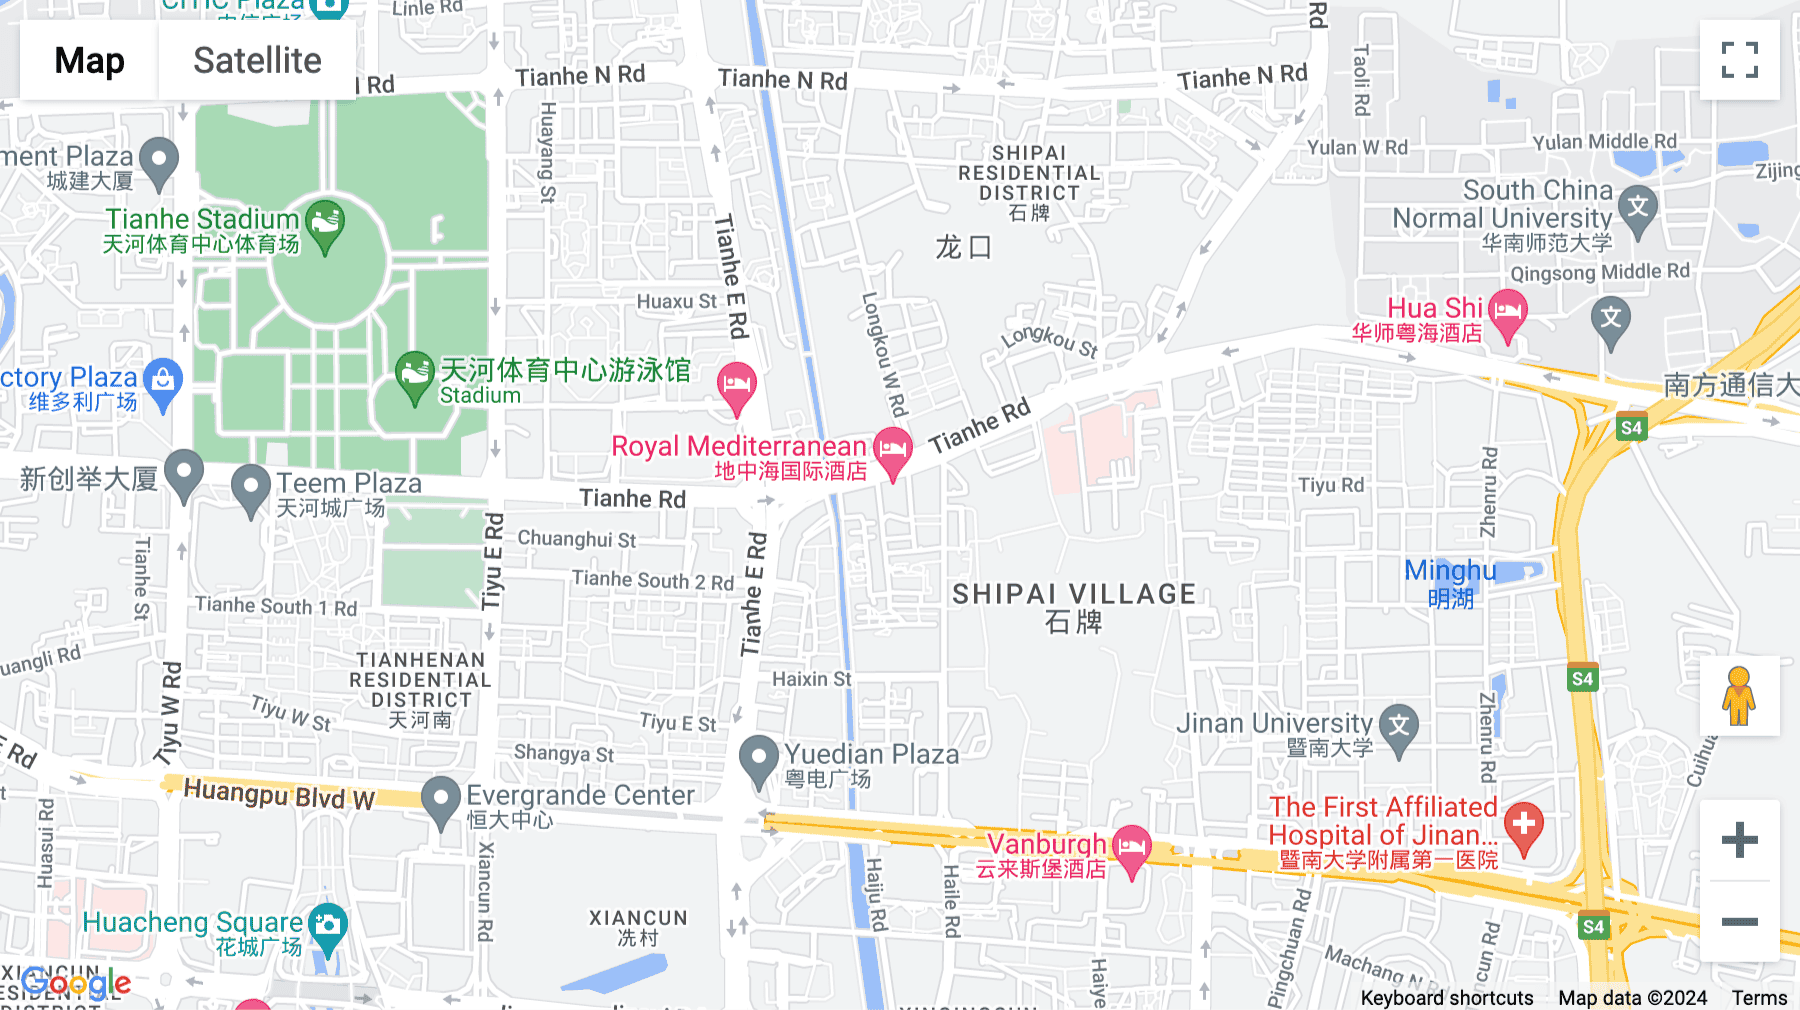 Click for interative map of No.518, Tianhe Road, Tianhe District, 8th Floor, Royal Mediterranean Hotel, Guangzhou